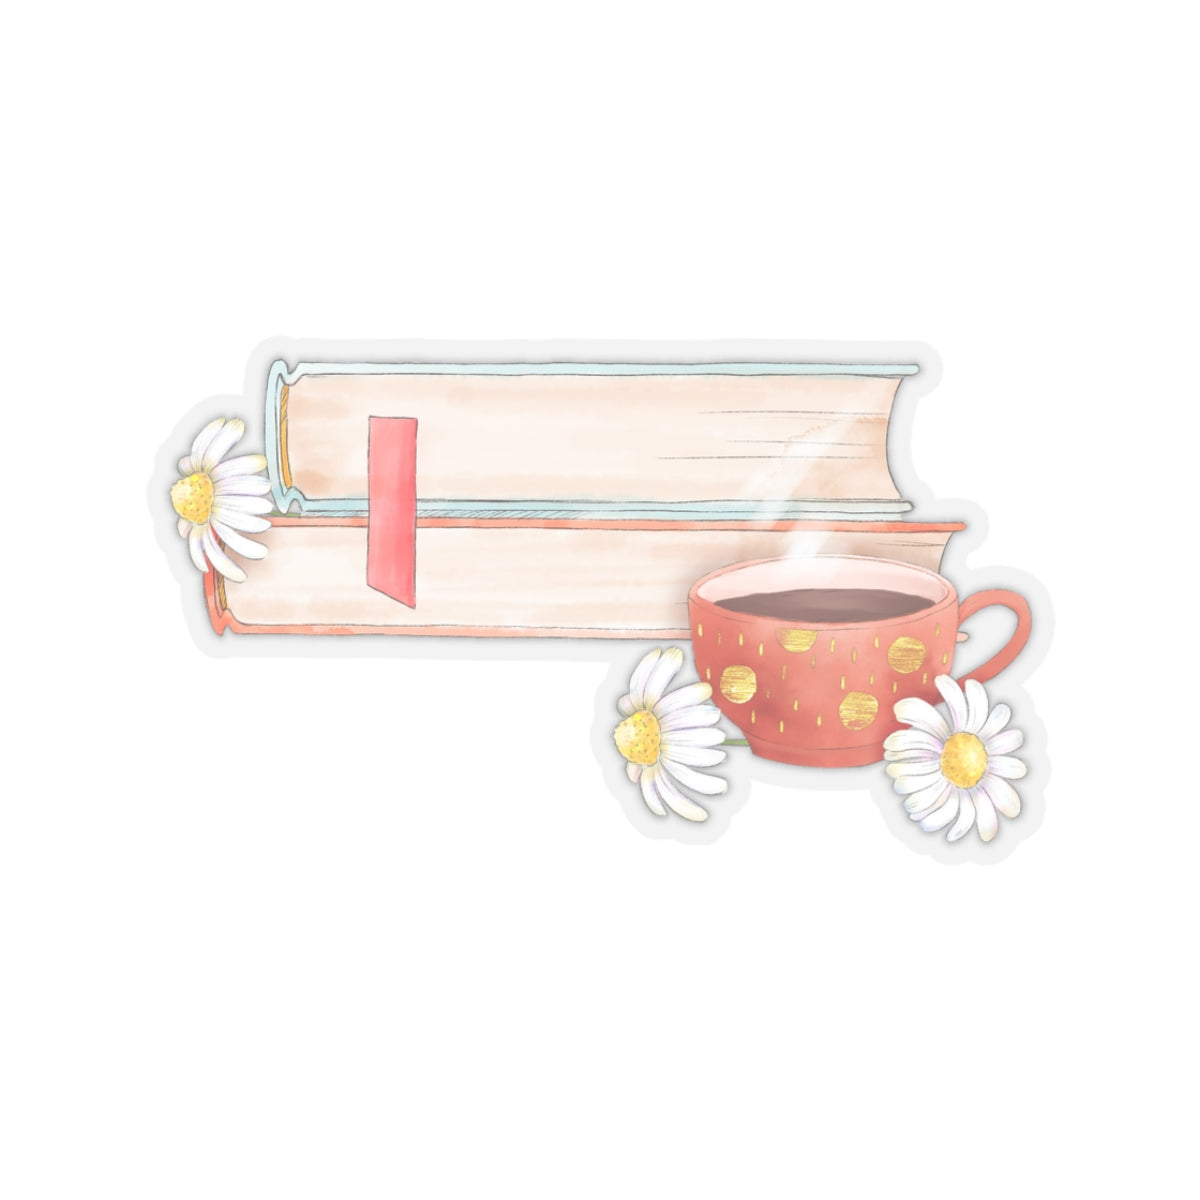 Book Lovers Stickers - Design 4